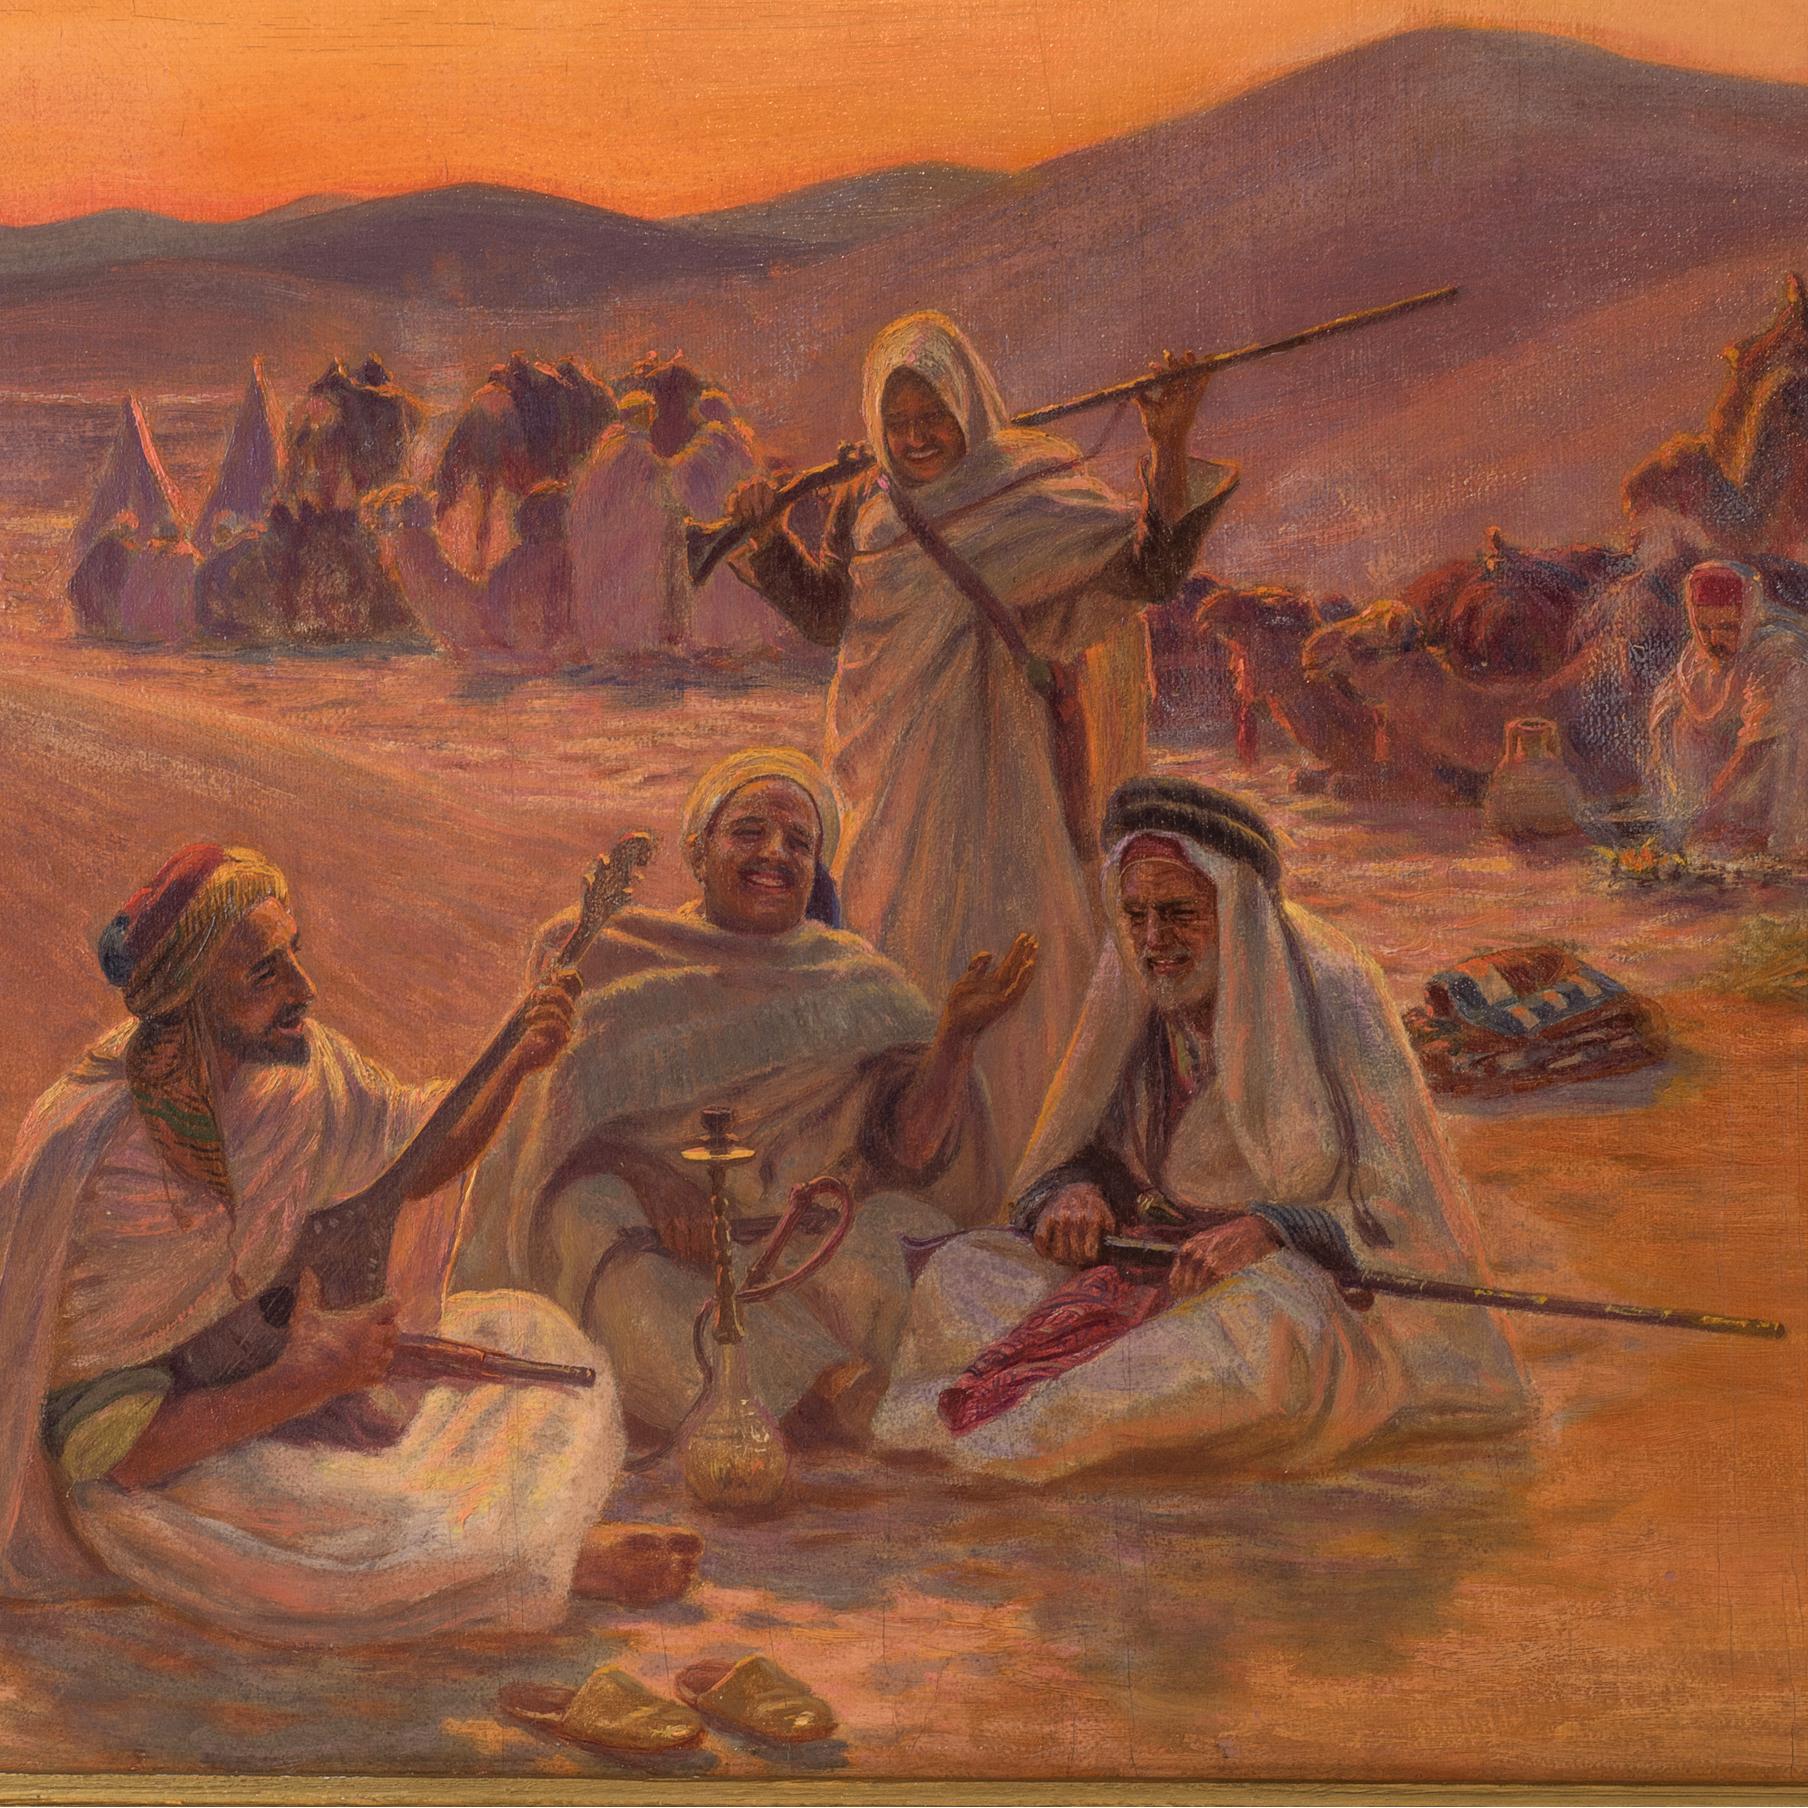 Swiss Fine Orientalist Painting of a Bedouin Camp by Otto Pilny